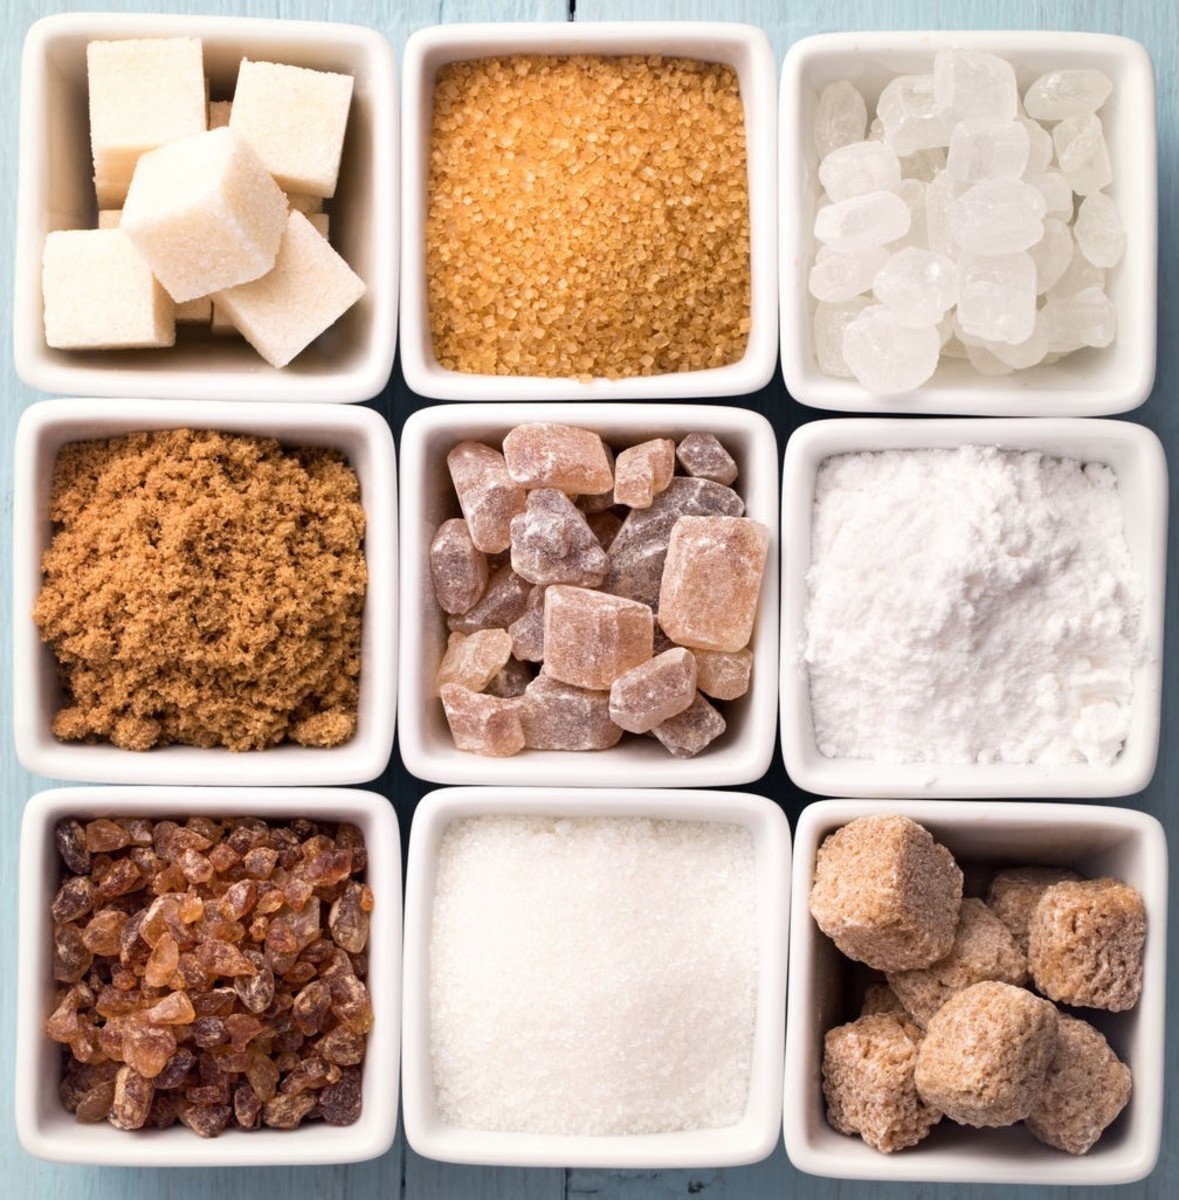 Sugars and Non-Nutritive Sweeteners